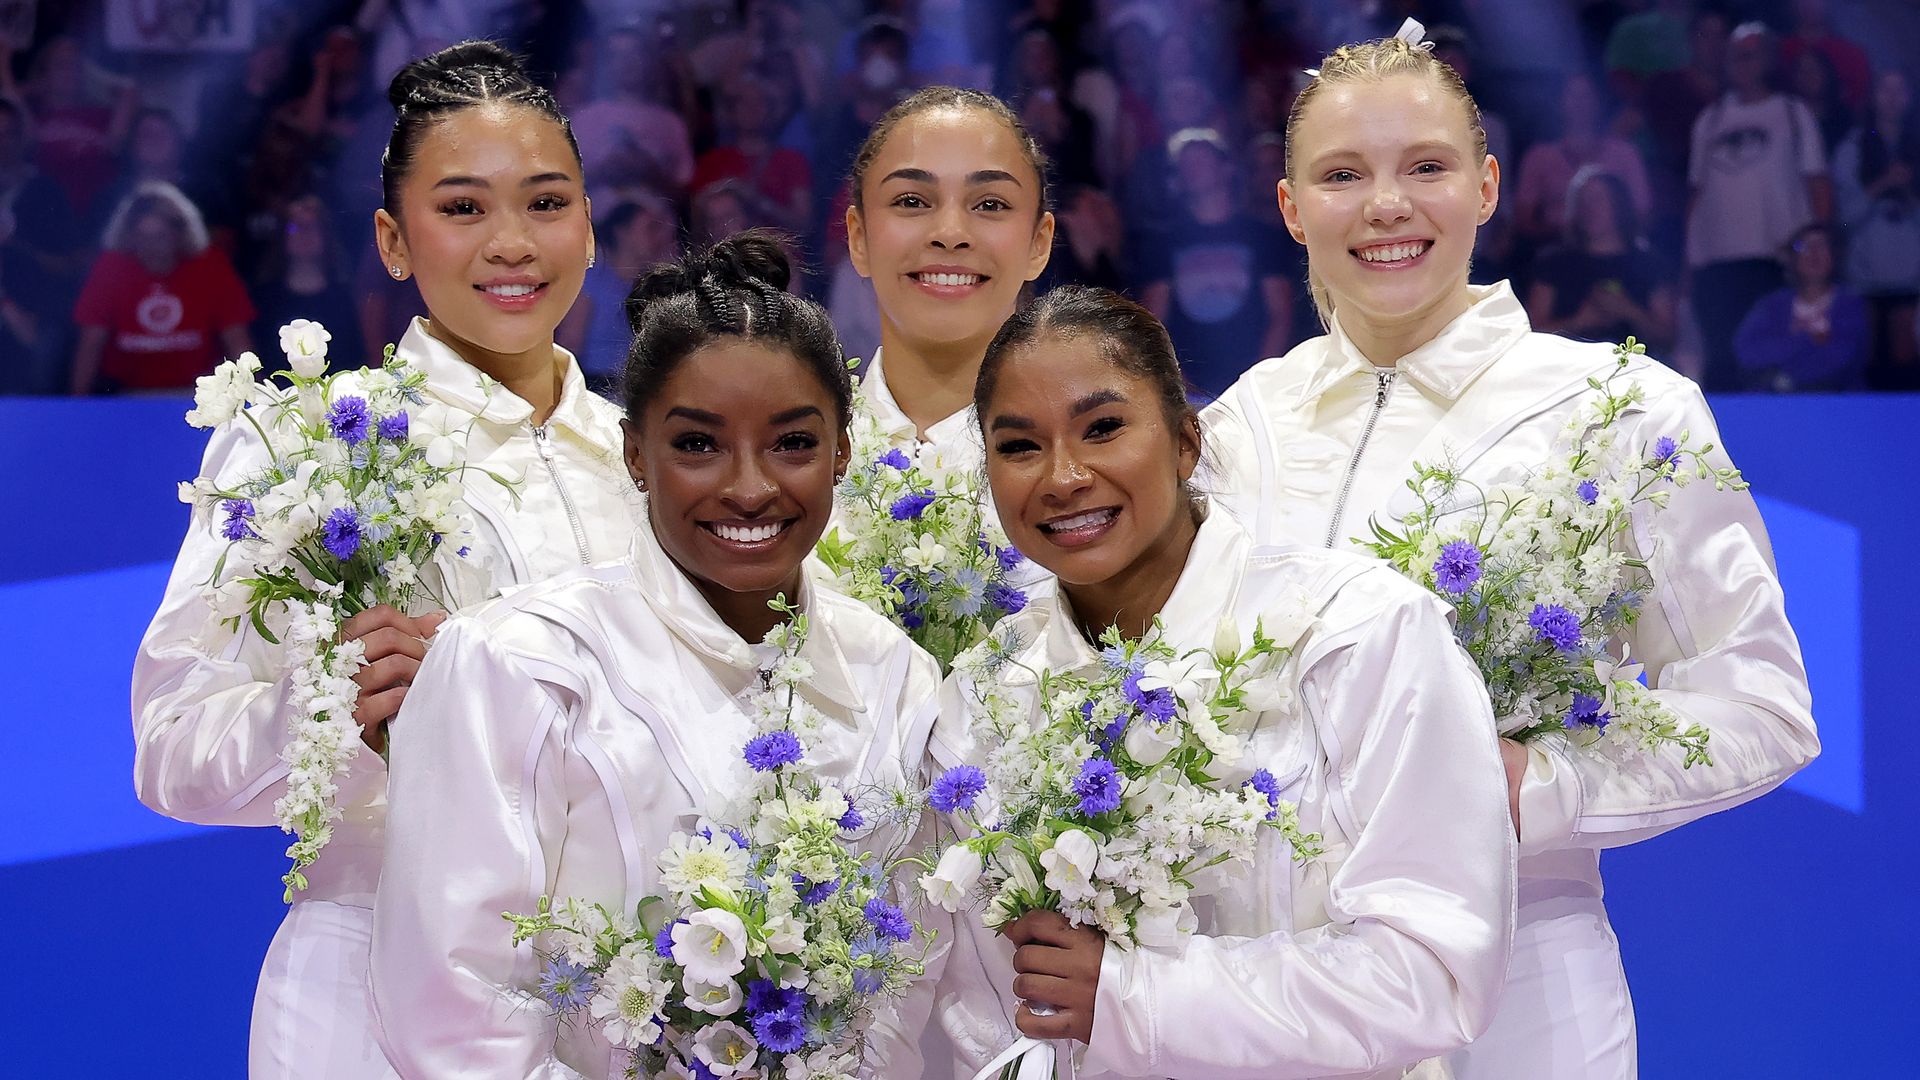 U.S. women’s gymnastics team win the gold medal during the 2024 Olympics